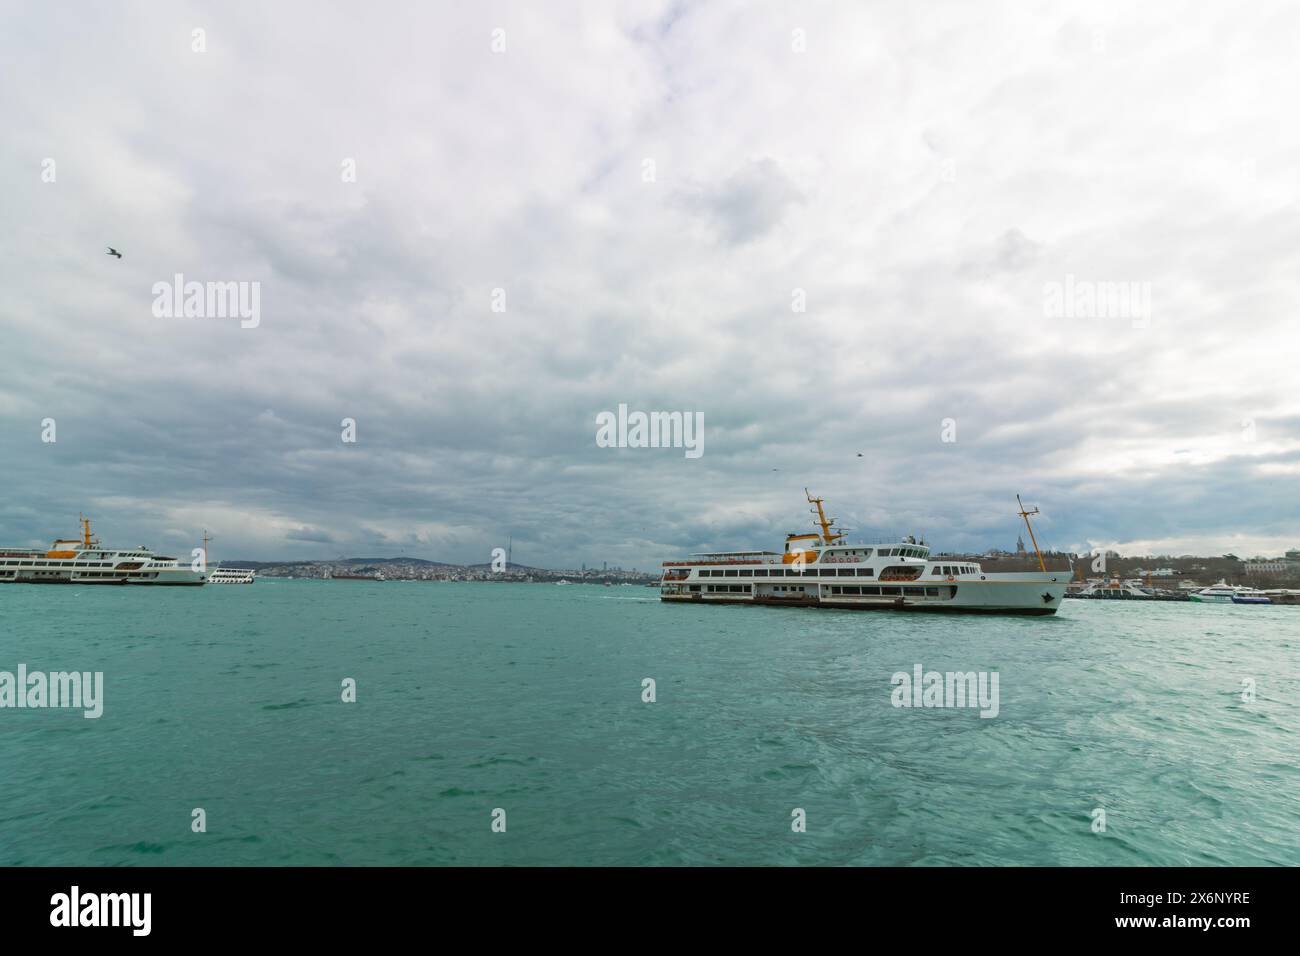 Istanbul view from Galata Bridge with Anatolian side and ferry. Visit Istanbul concept photo. Stock Photo